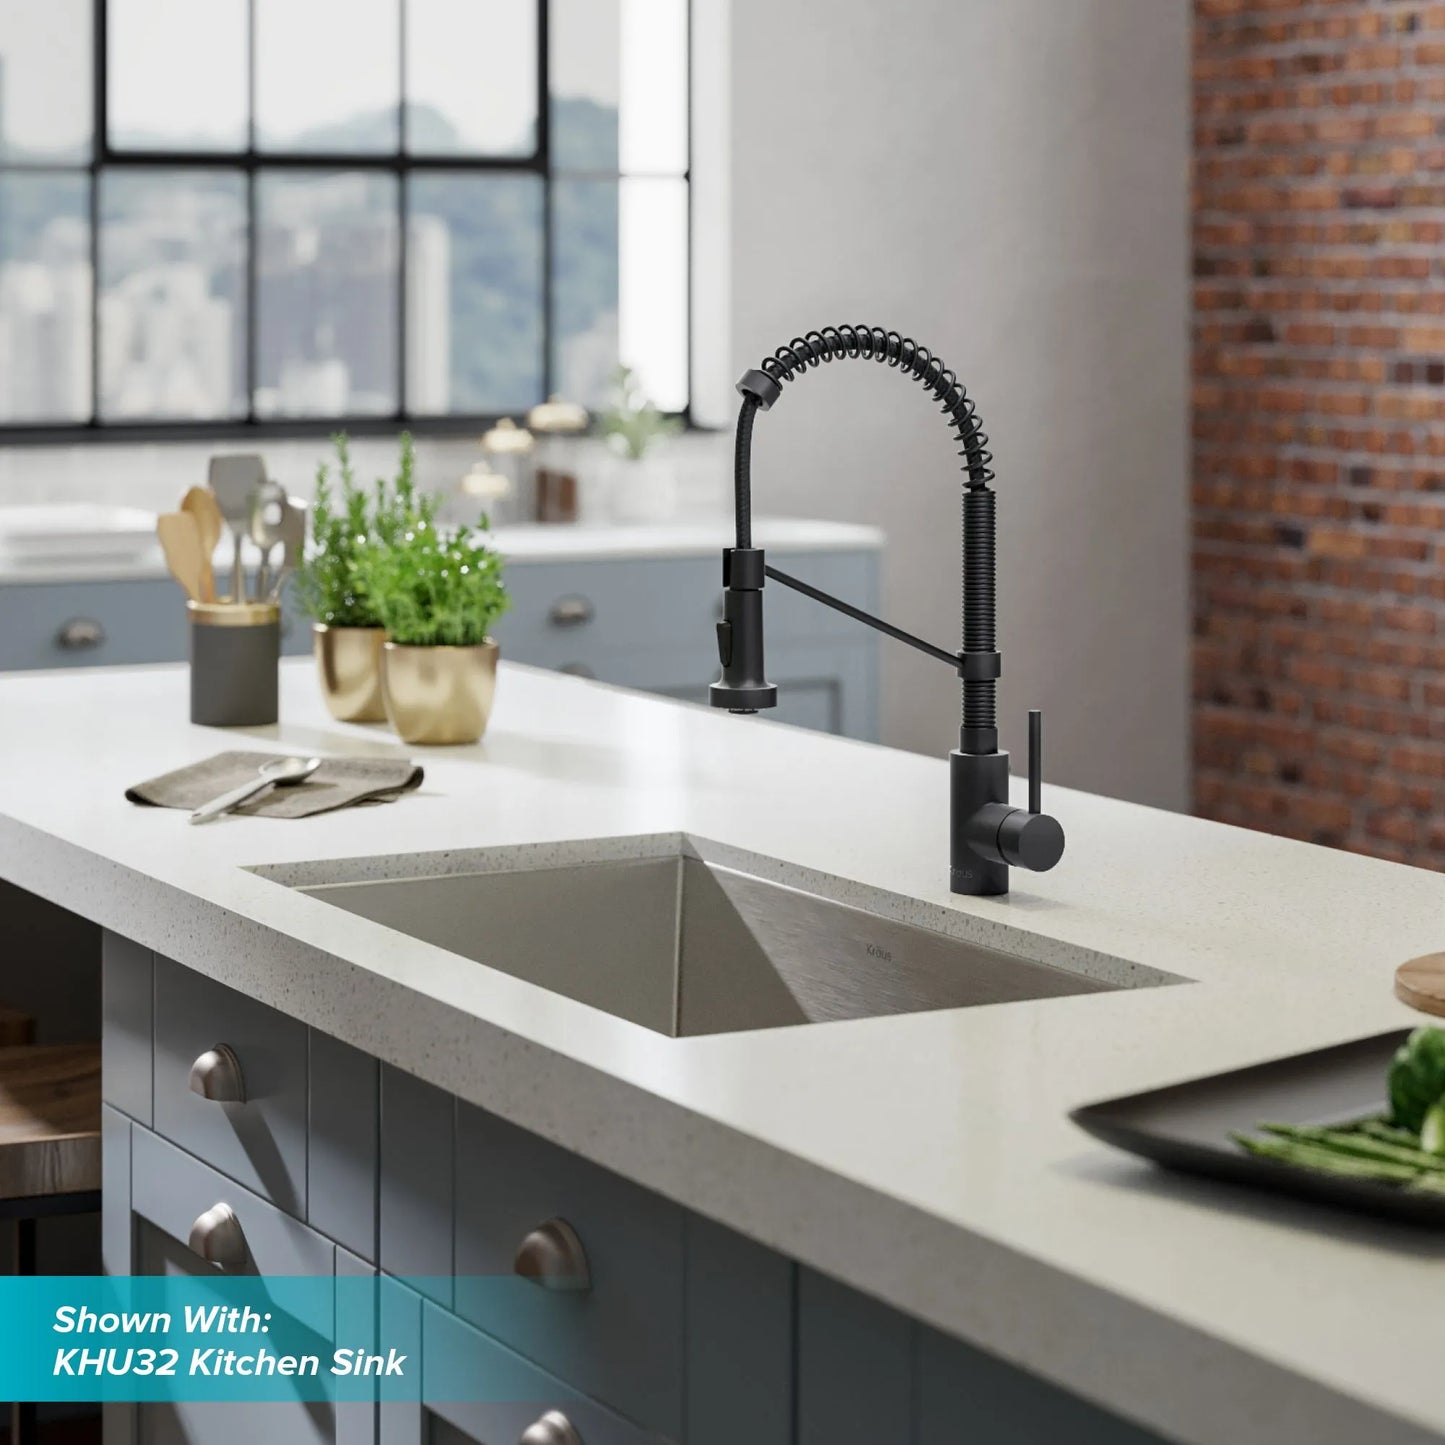 Kraus Bolden Series  KPF1610MB Single Handle Pull Down Commercial Kitchen Faucet 1.8 GPM Flow Rate, Reach Technology, 2-Function Faucet, High-Arc 180 Swivel Spout, Lead-Free Braided Nylon Waterway, ADA Complaint,Matte Black, 369281